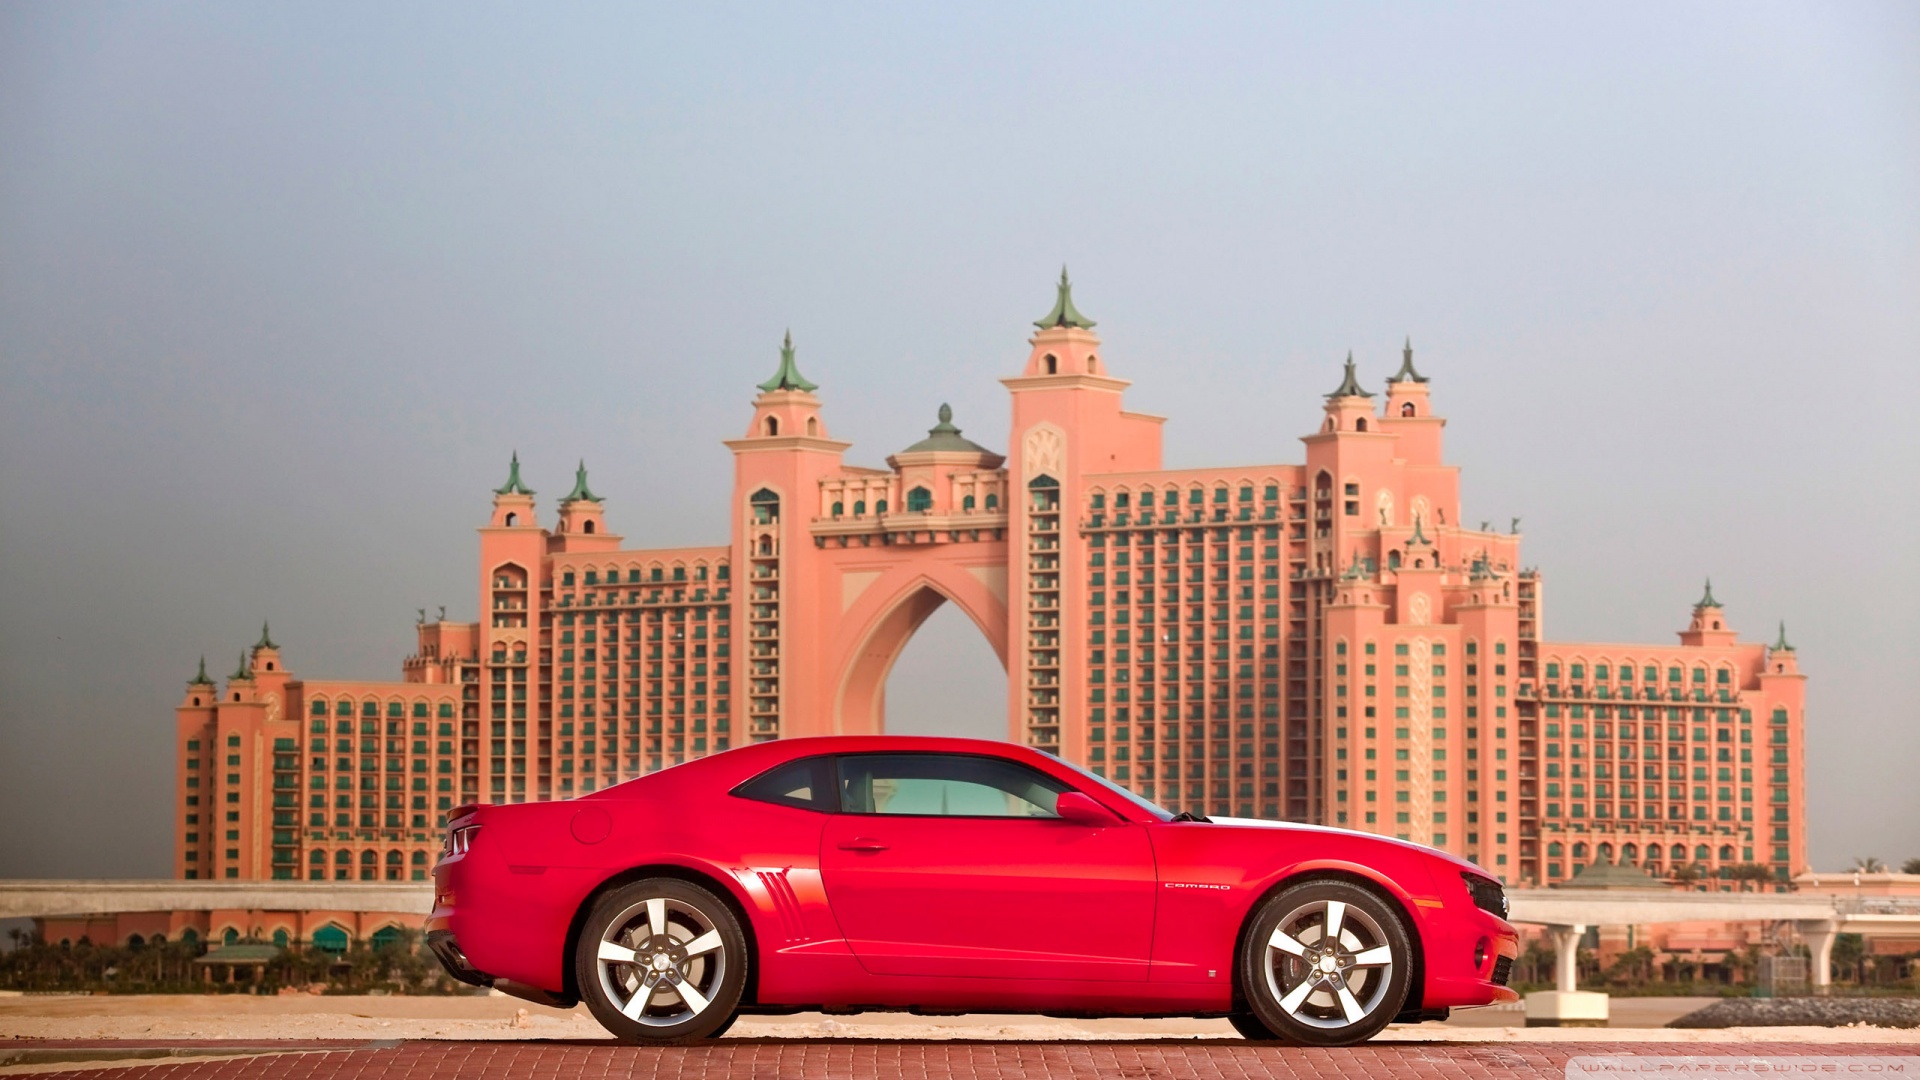 2010 Chevrolet Camaro In Middle East Side View Wallpaper - Camaro Ss 2010 - HD Wallpaper 